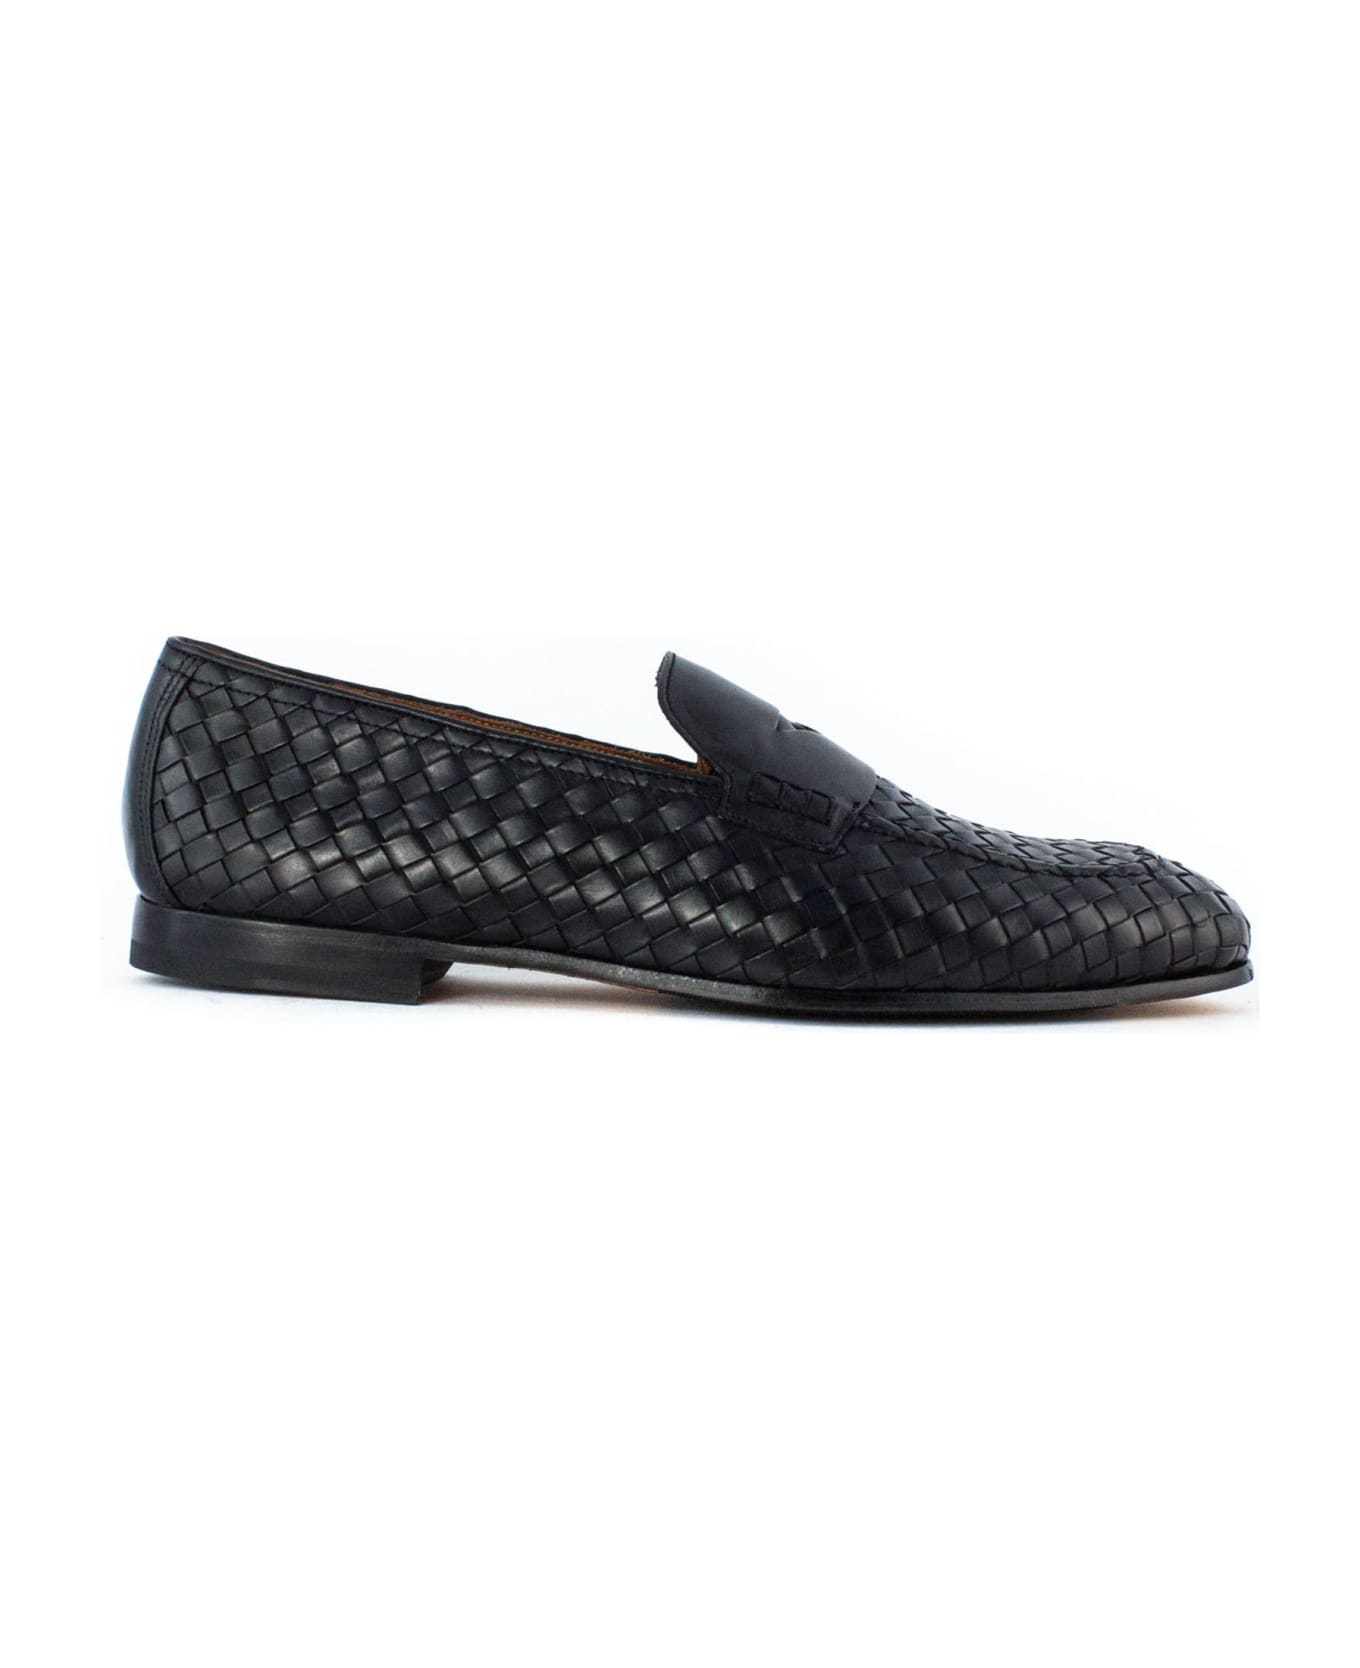 Doucal's Black Leather Penny Loafers - Black